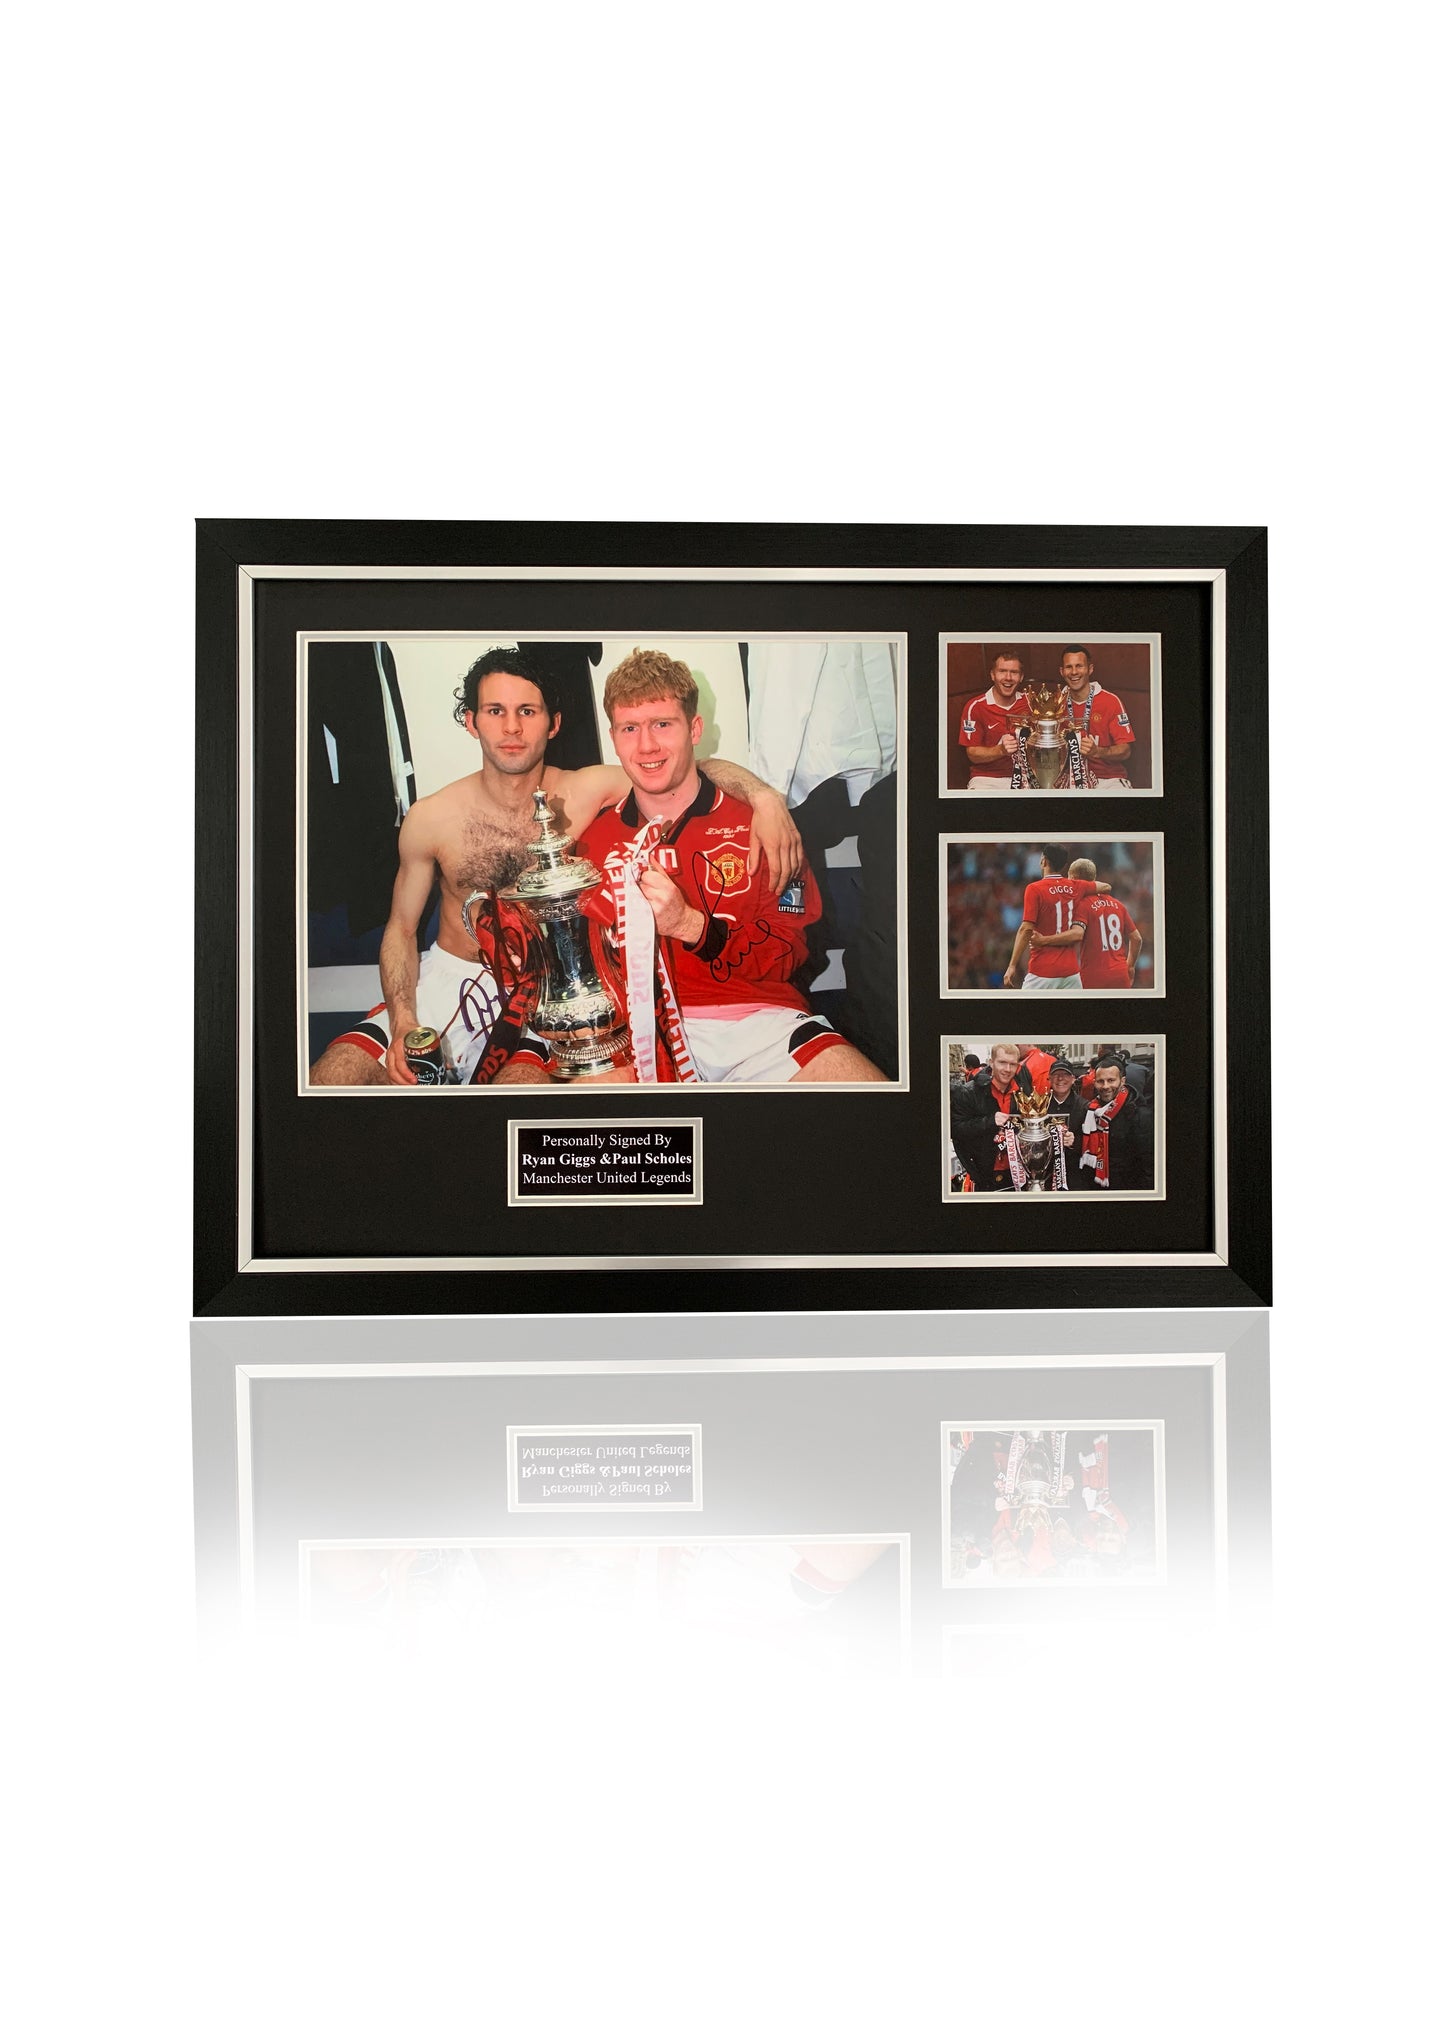 Giggs and Scholes Manchester United large signed framed photo montage